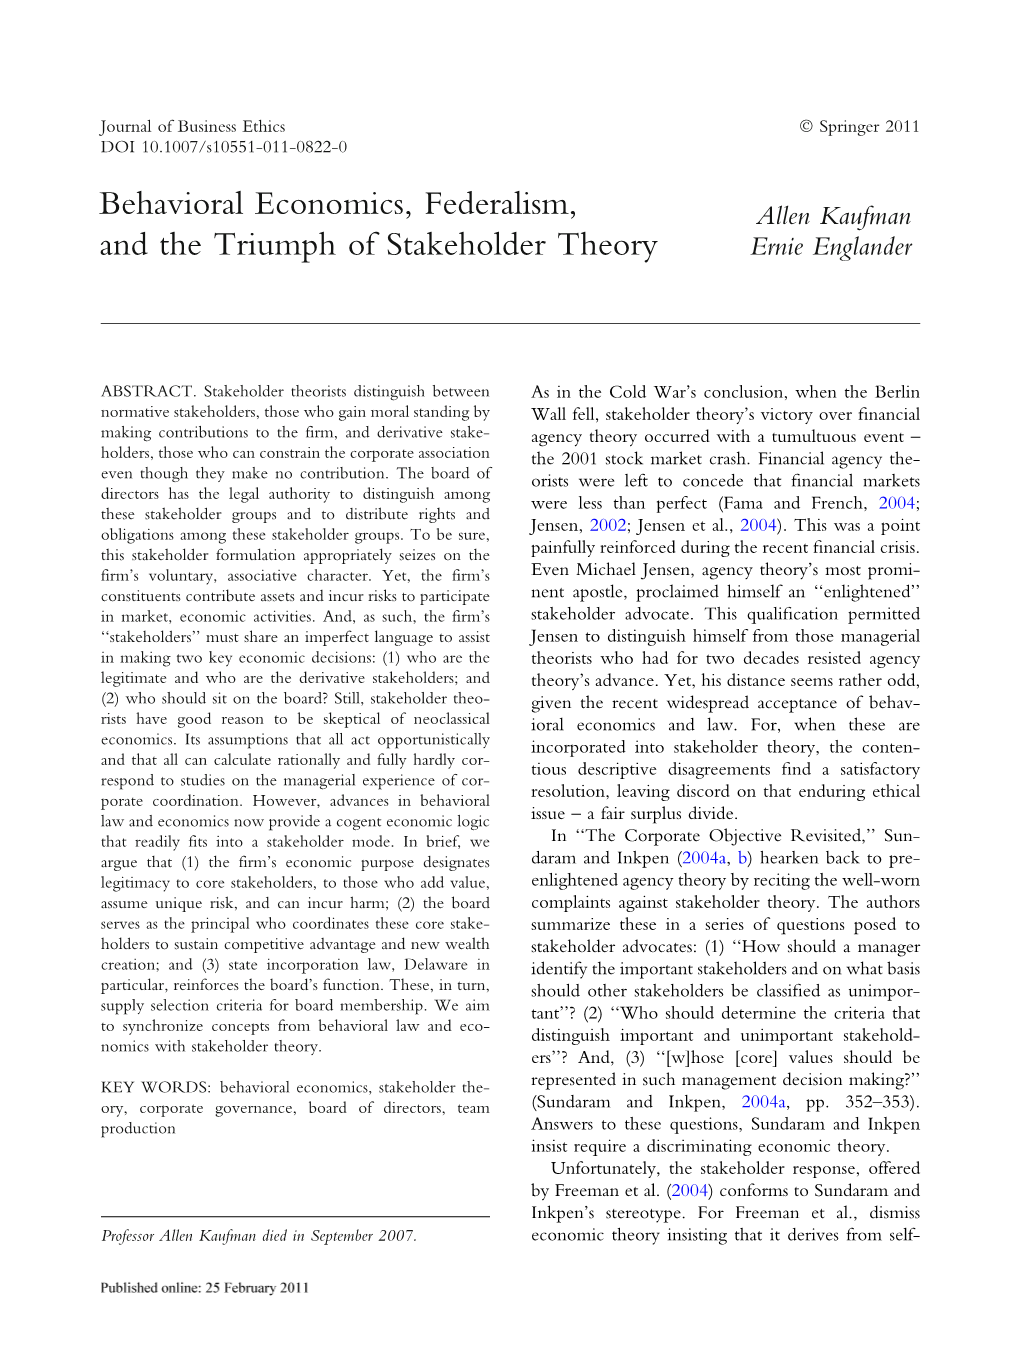 Behavioral Economics, Federalism, and the Triumph of Stakeholder